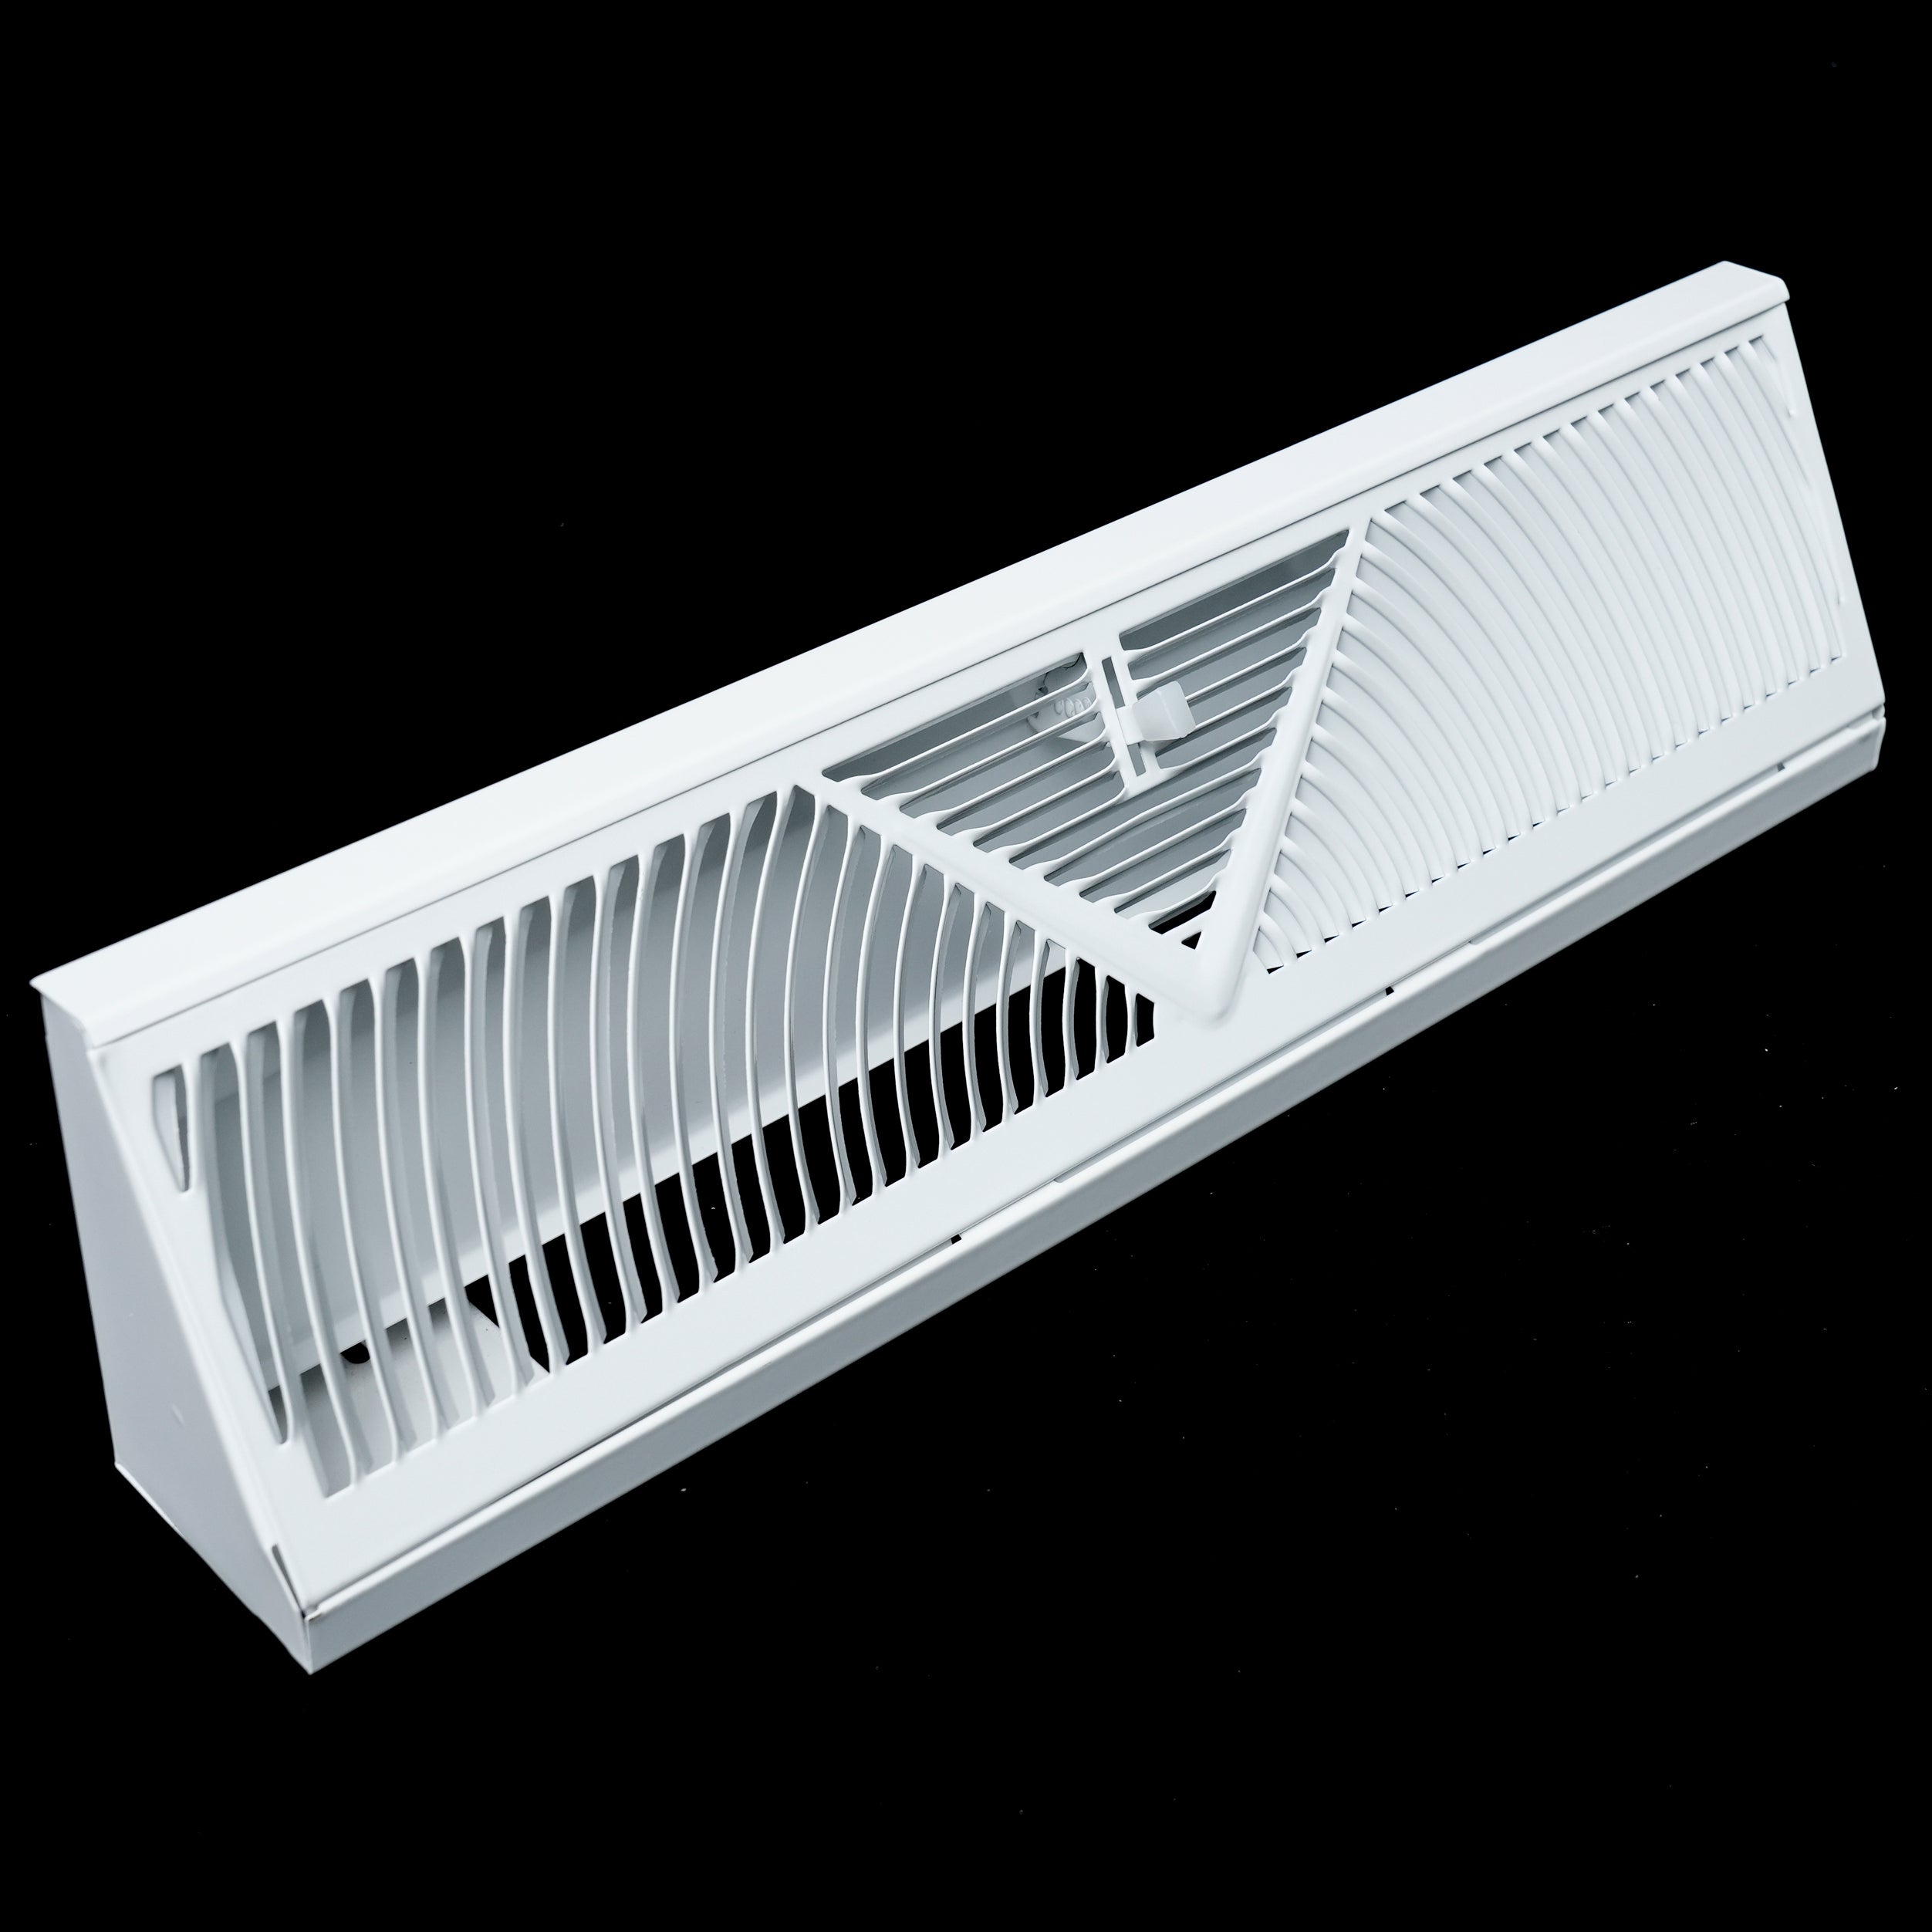 airgrilles 18" corner baseboard return air grille   round type air flow design   register vent cover grill   adjustable lever for air flow control   white hnd-cbb-wh-18  - 1